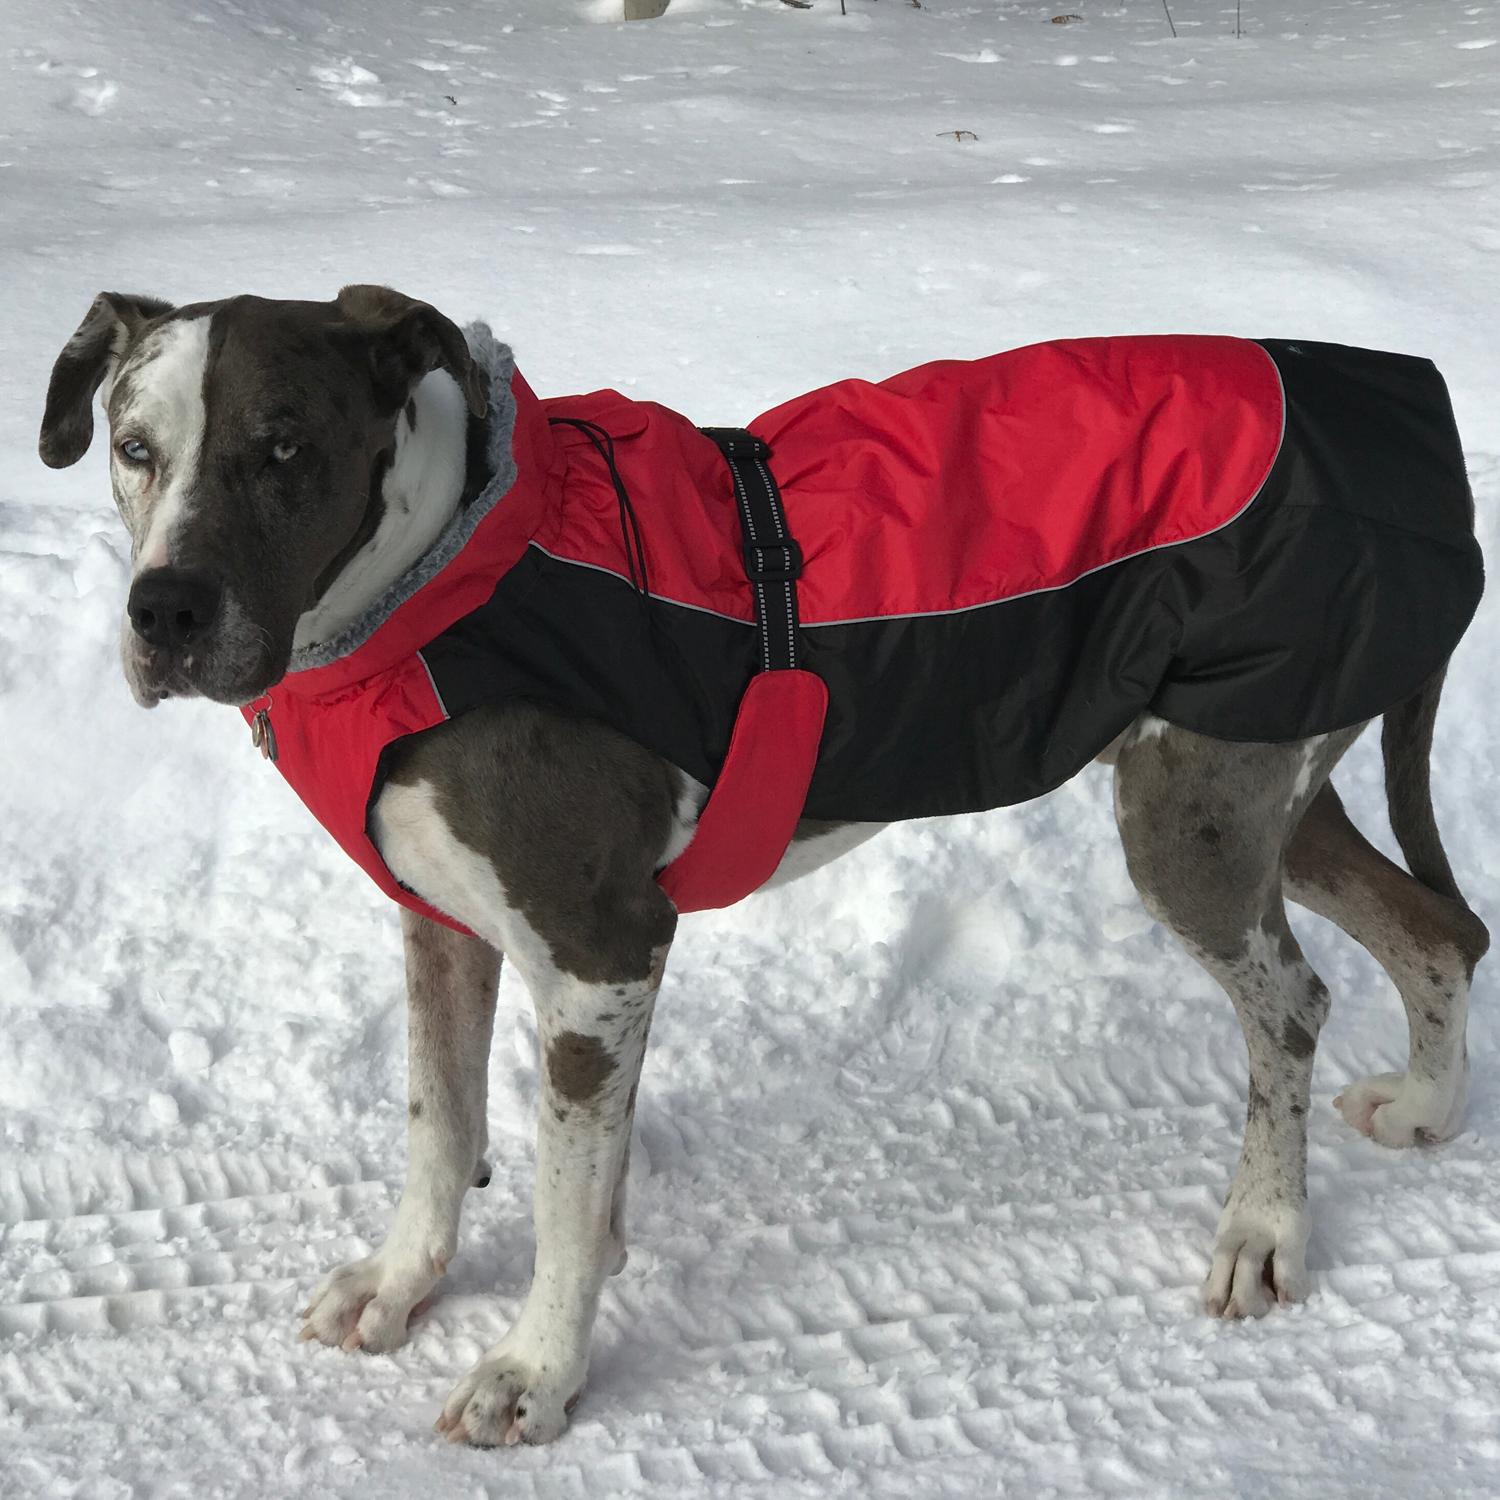 Alpine All-Weather Dog Coat by Doggie Design - Red and Black